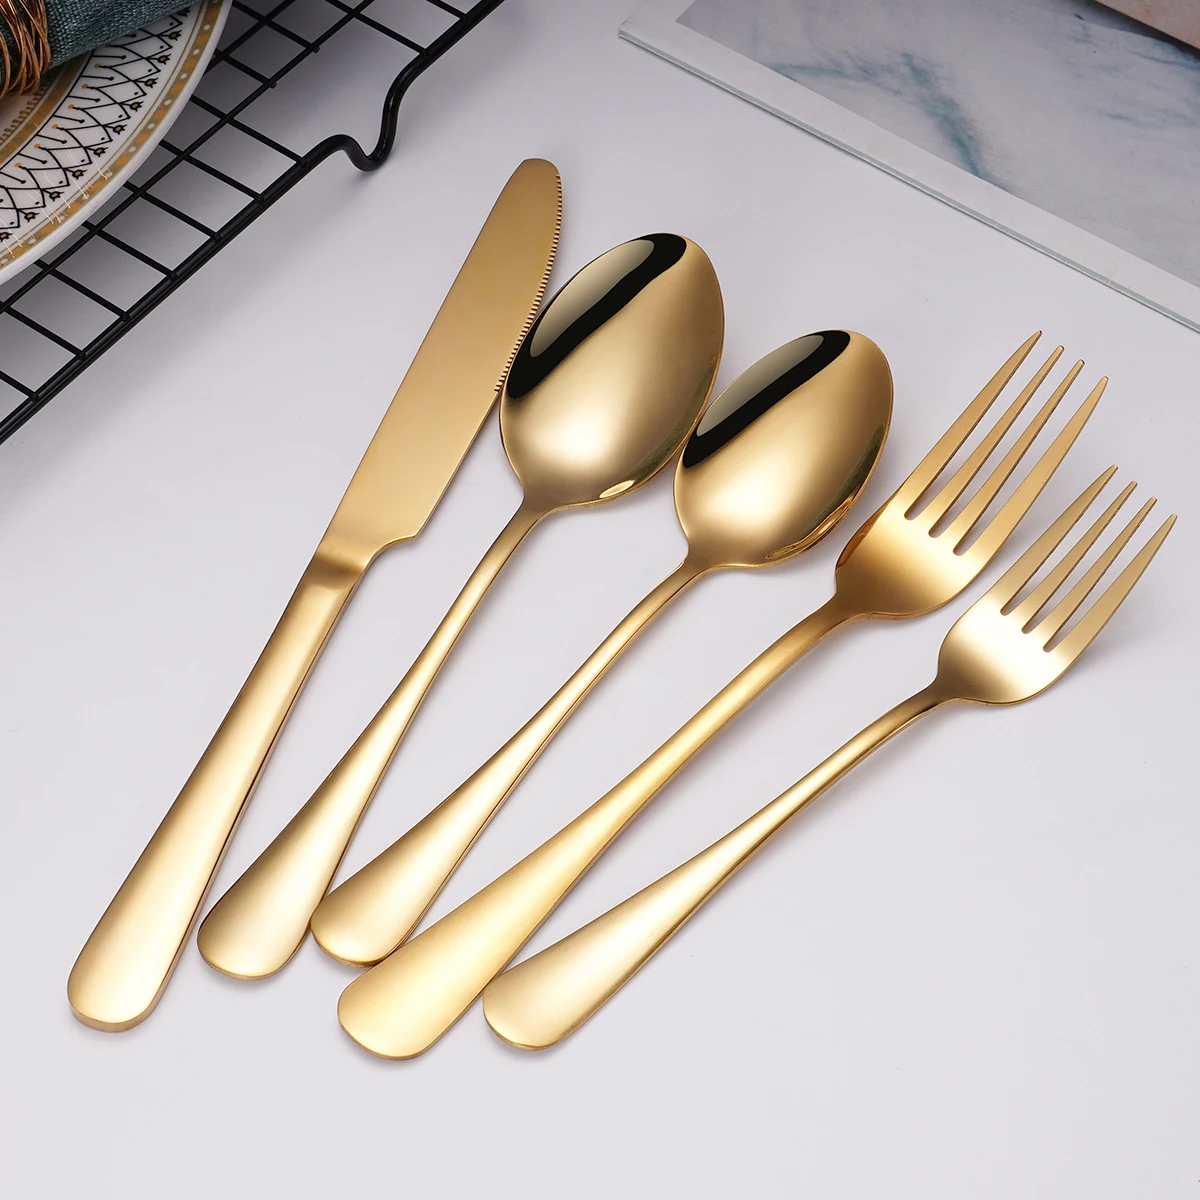 

Wholesale Custom Luxury Wedding Reusable Silverware Korean Knife Spoon Fork Stainless Steel Flatware Gold Plated Cutlery Set, Silver, gold, rose gold, colorful, black, customizable